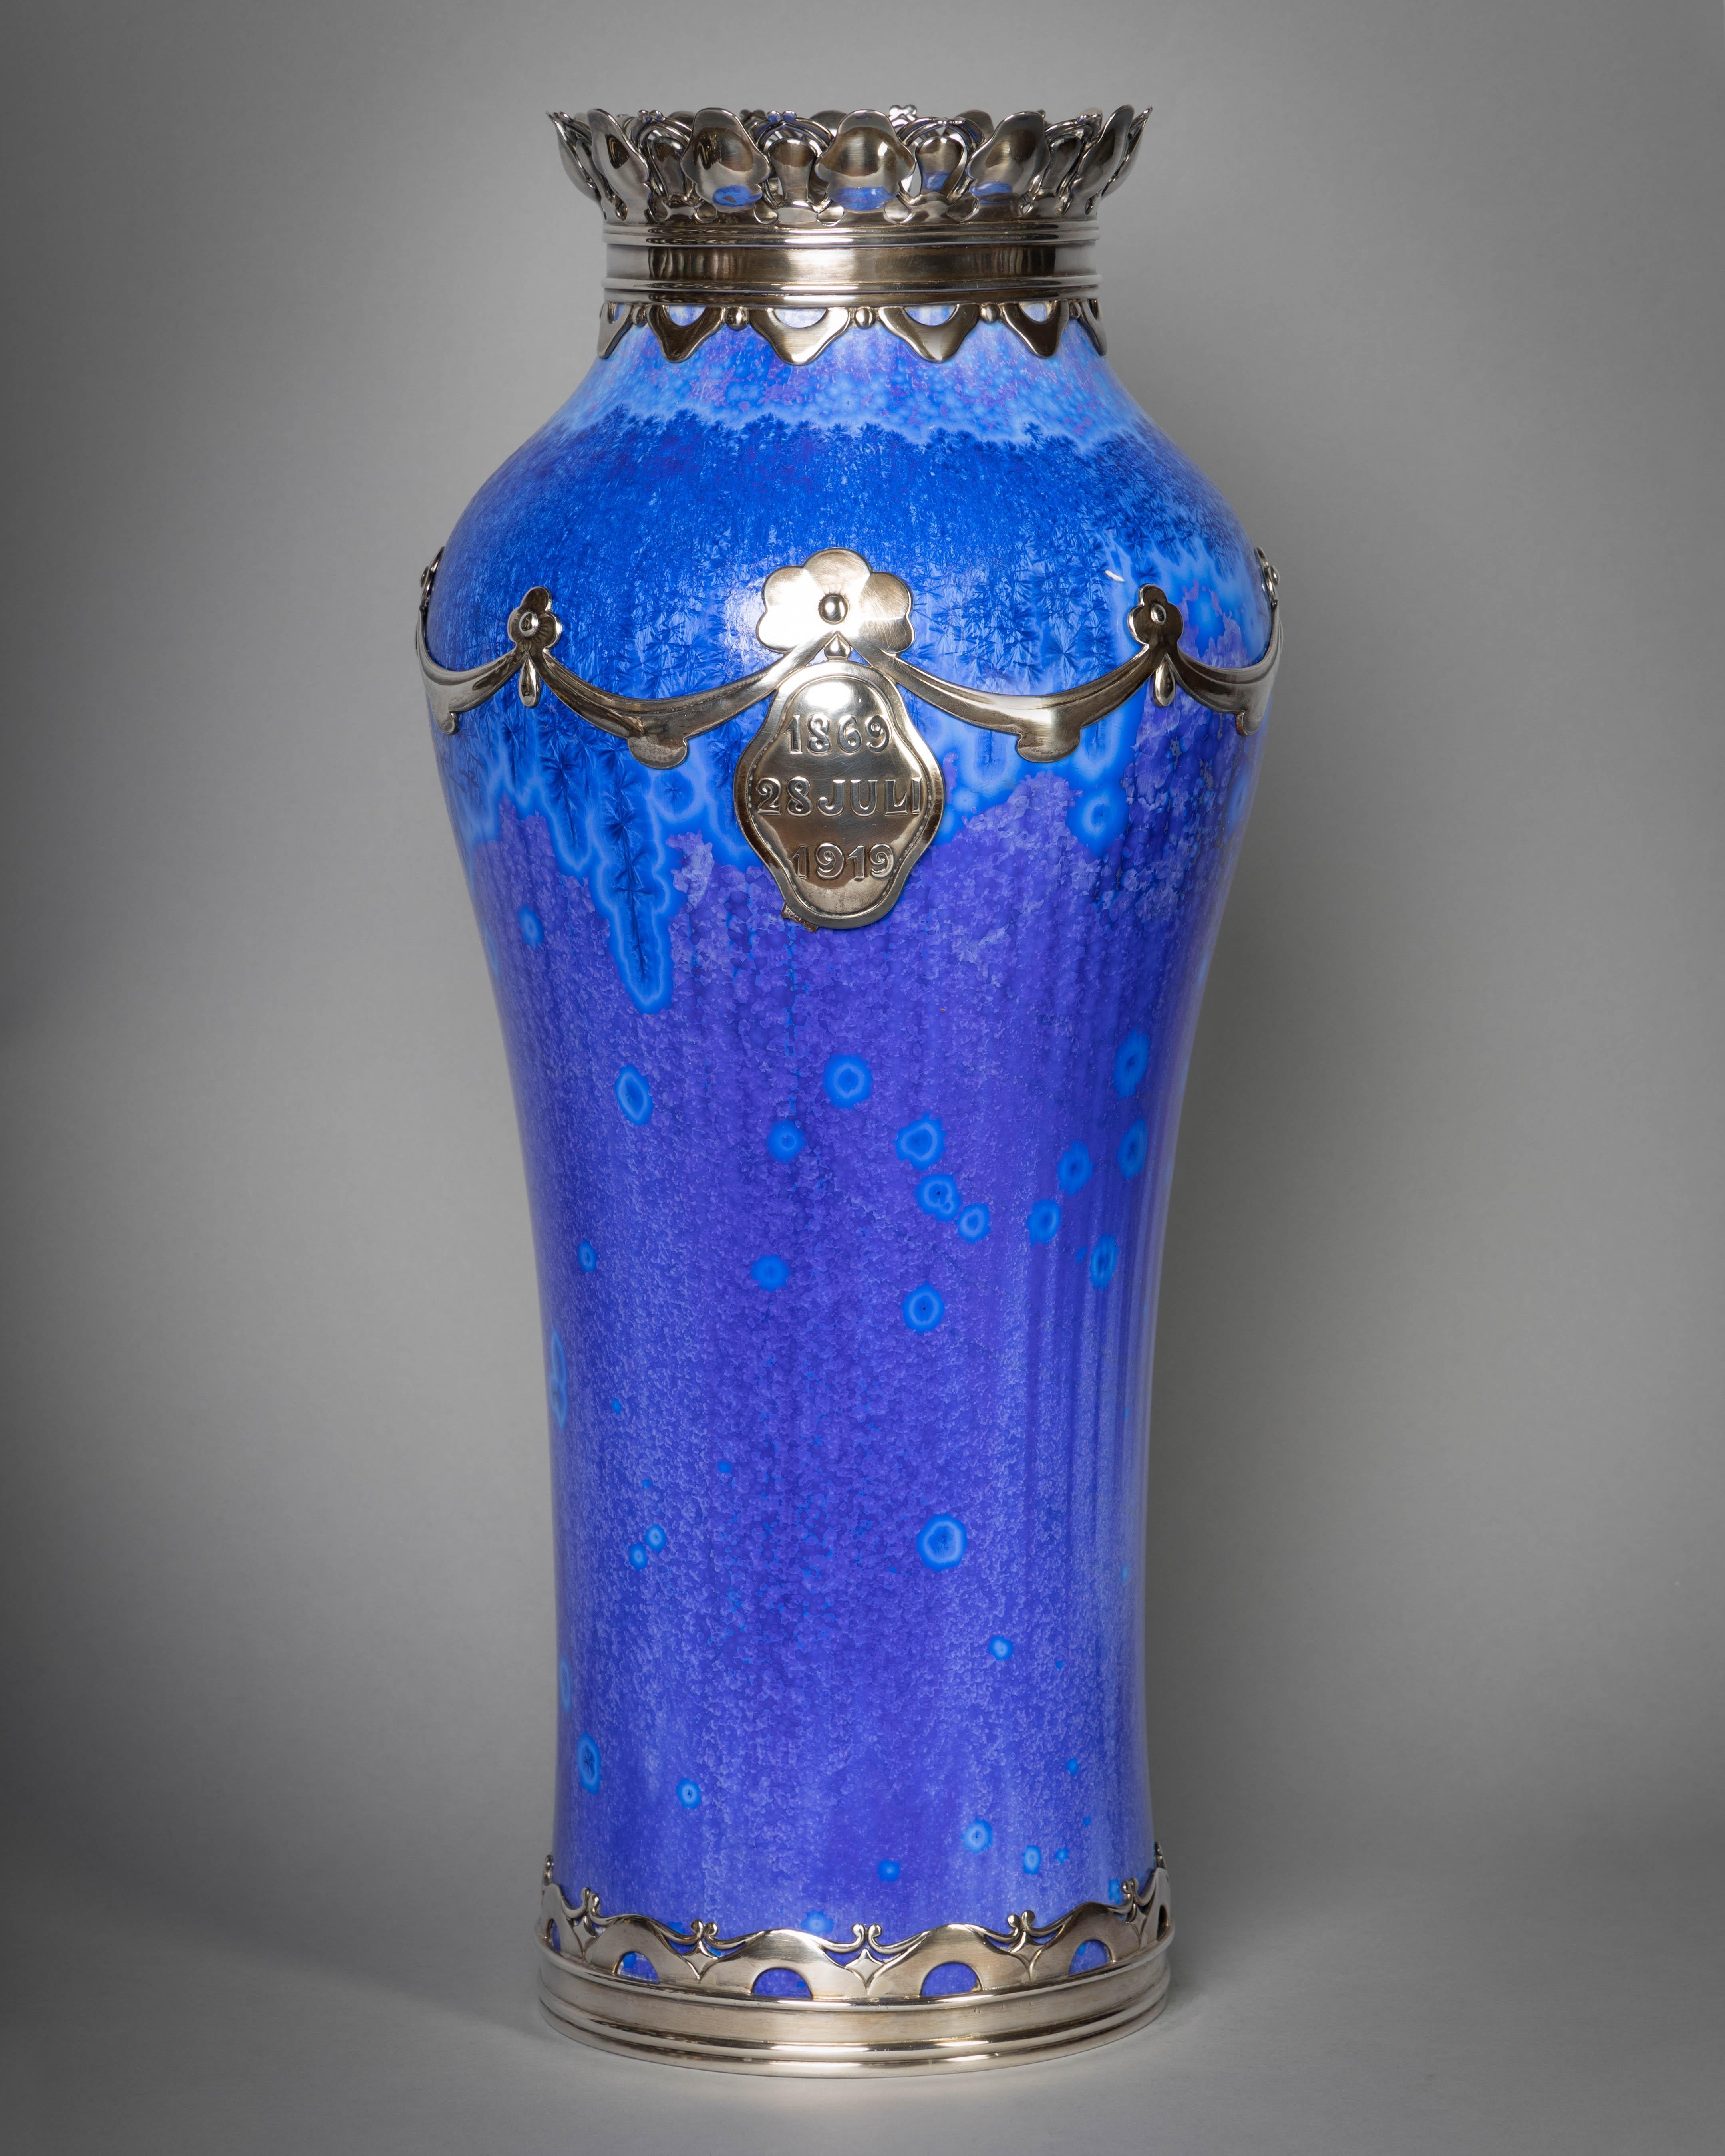 Silver Mounted Royal Copenhagen Crystalline Royal Presentation Vase, Dated 1915 In Good Condition For Sale In New York, NY